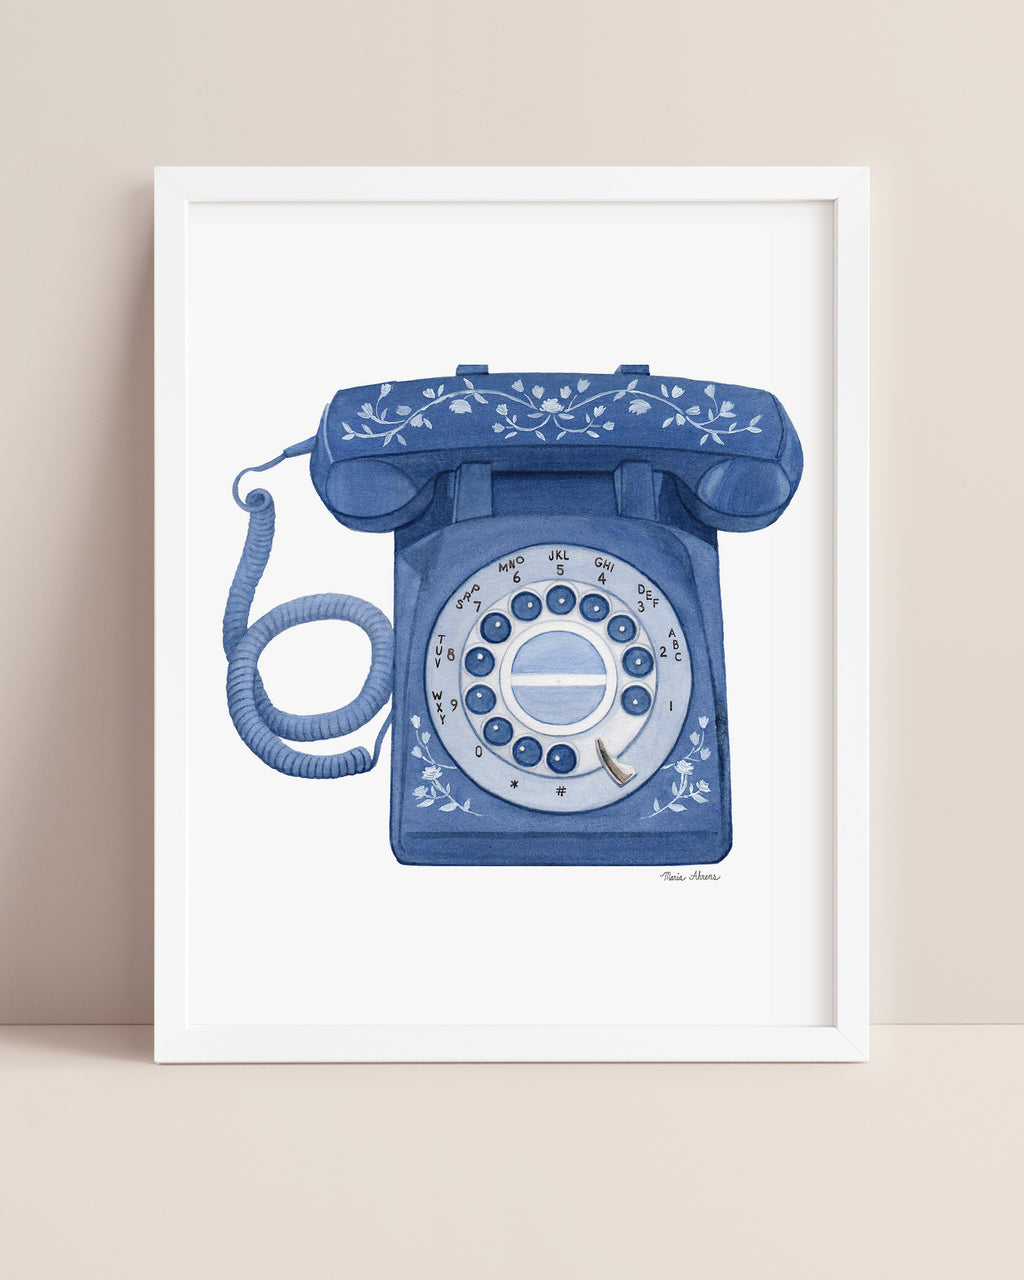 Blue and White Floral Vintage Phone Watercolor Art Print